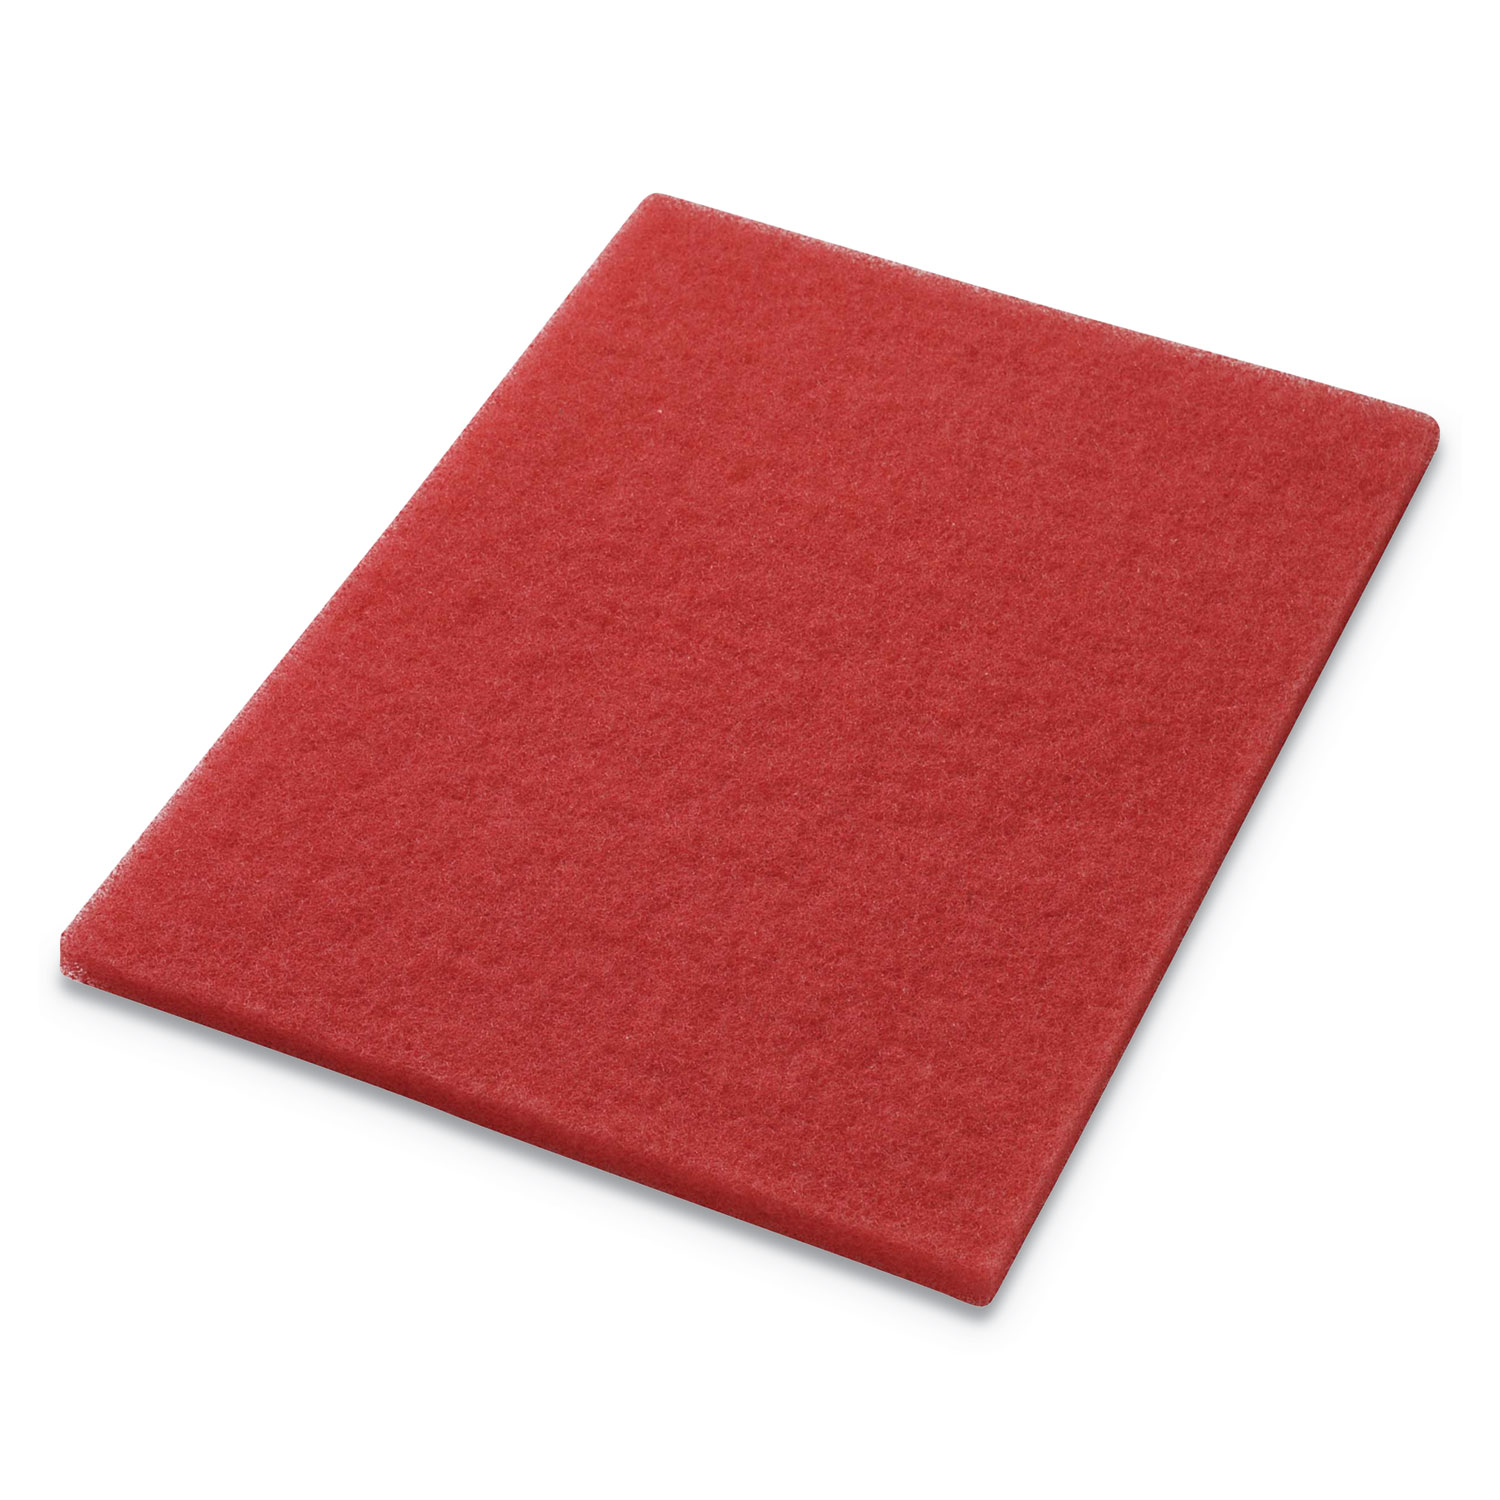  Americo 40441420 Buffing Pads, 14w x 20h, Red, 5/CT (AMF40441420) 